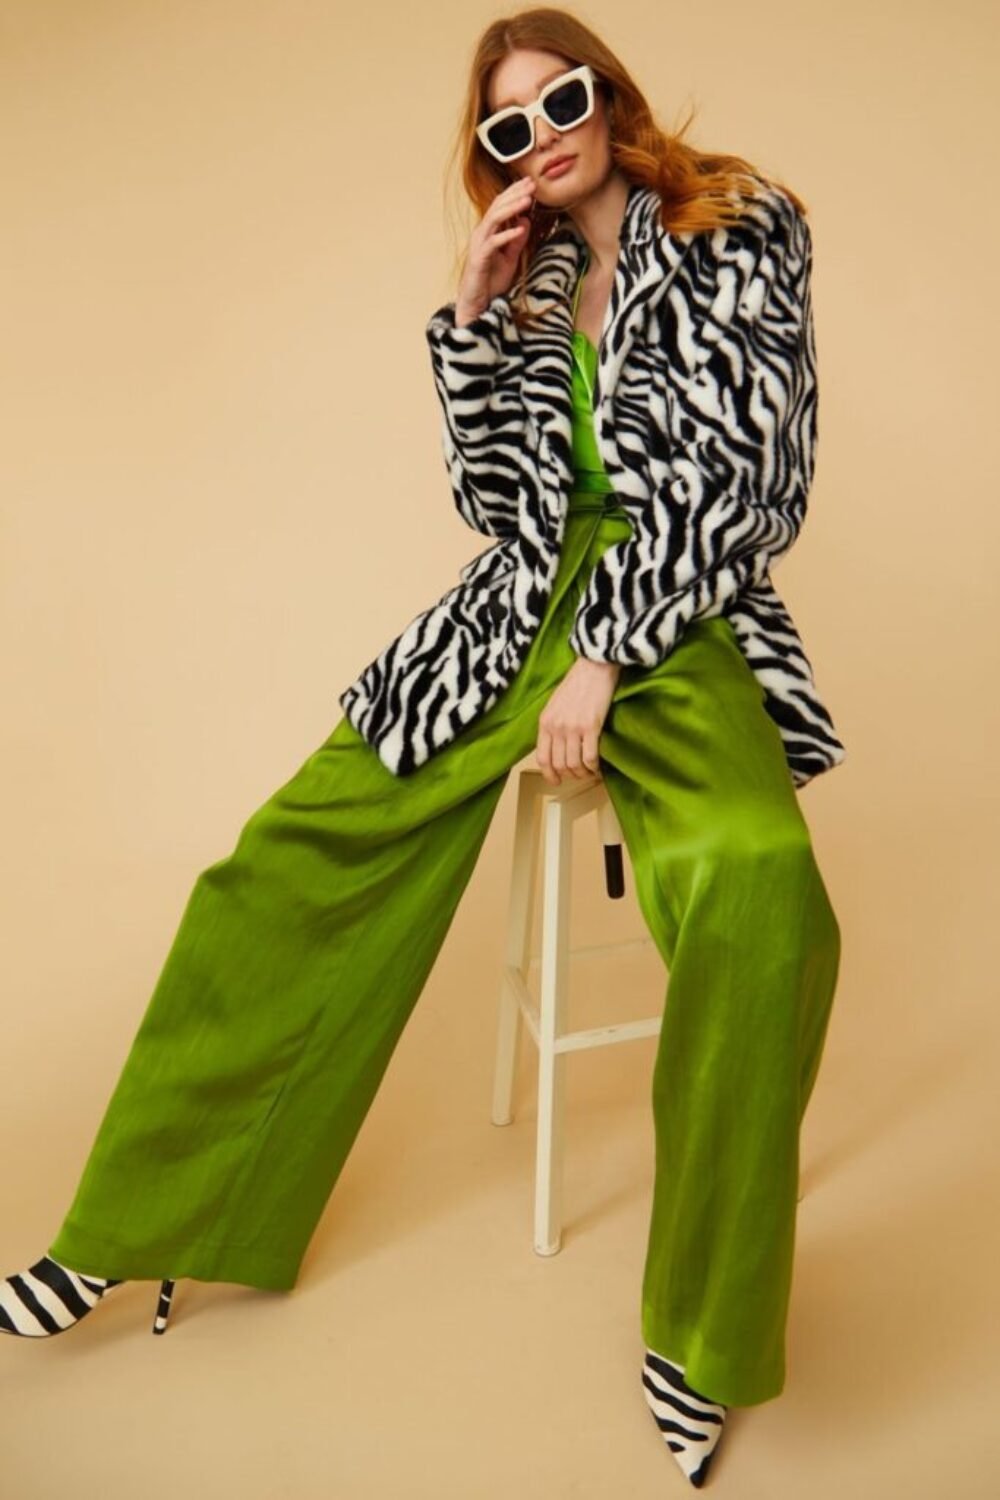 Shop Lux Zebra Faux Fur Oversized Coat and women's luxury and designer clothes at www.lux-apparel.co.uk